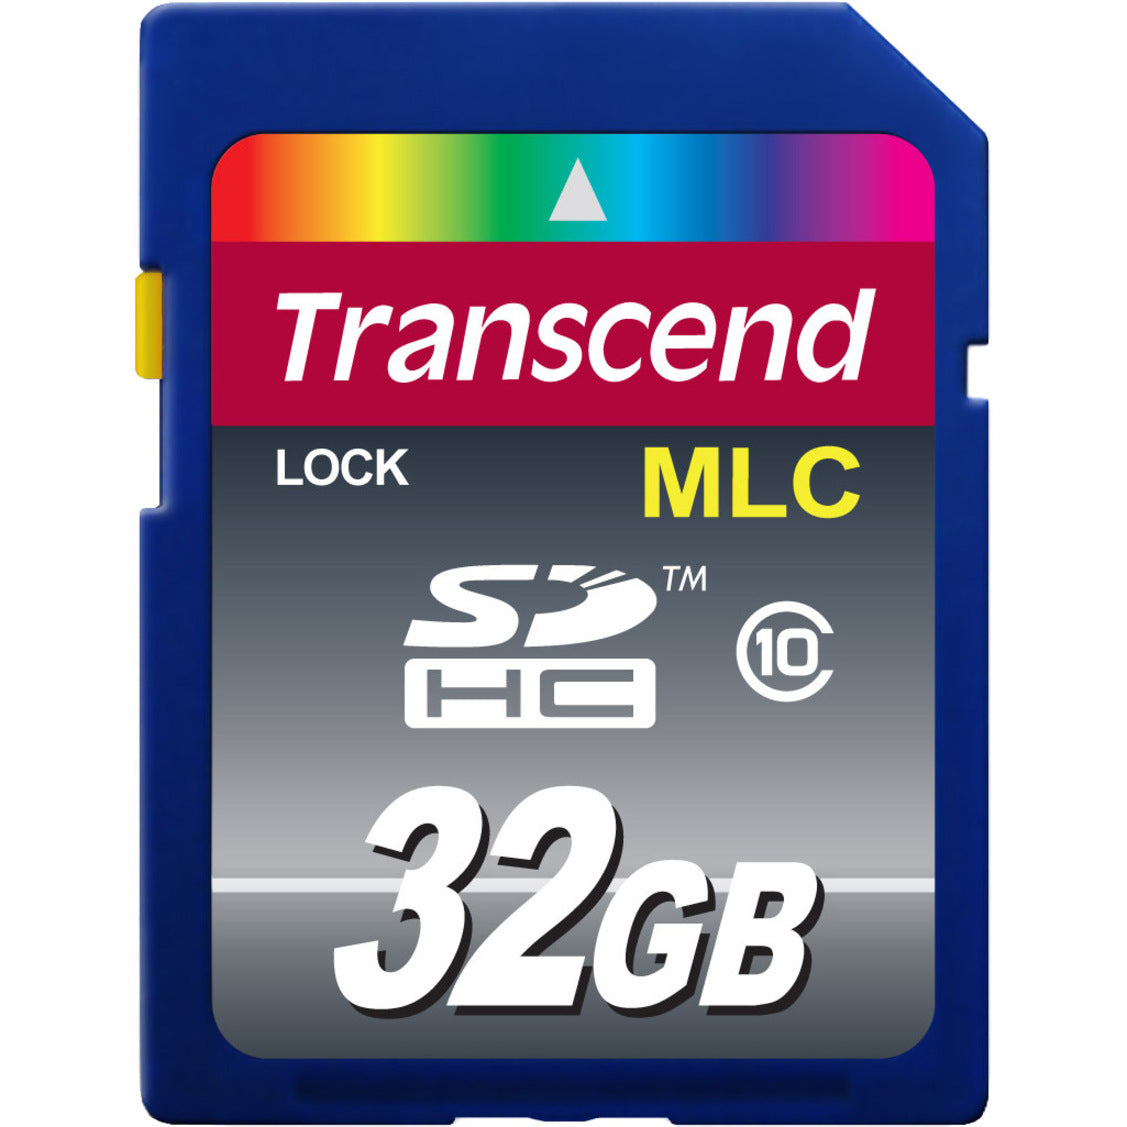 Transcend TS32GSDHC10M Industrial SDHC Class 10 Card, 32GB Storage Capacity, Write Protection Switch, ECC Support